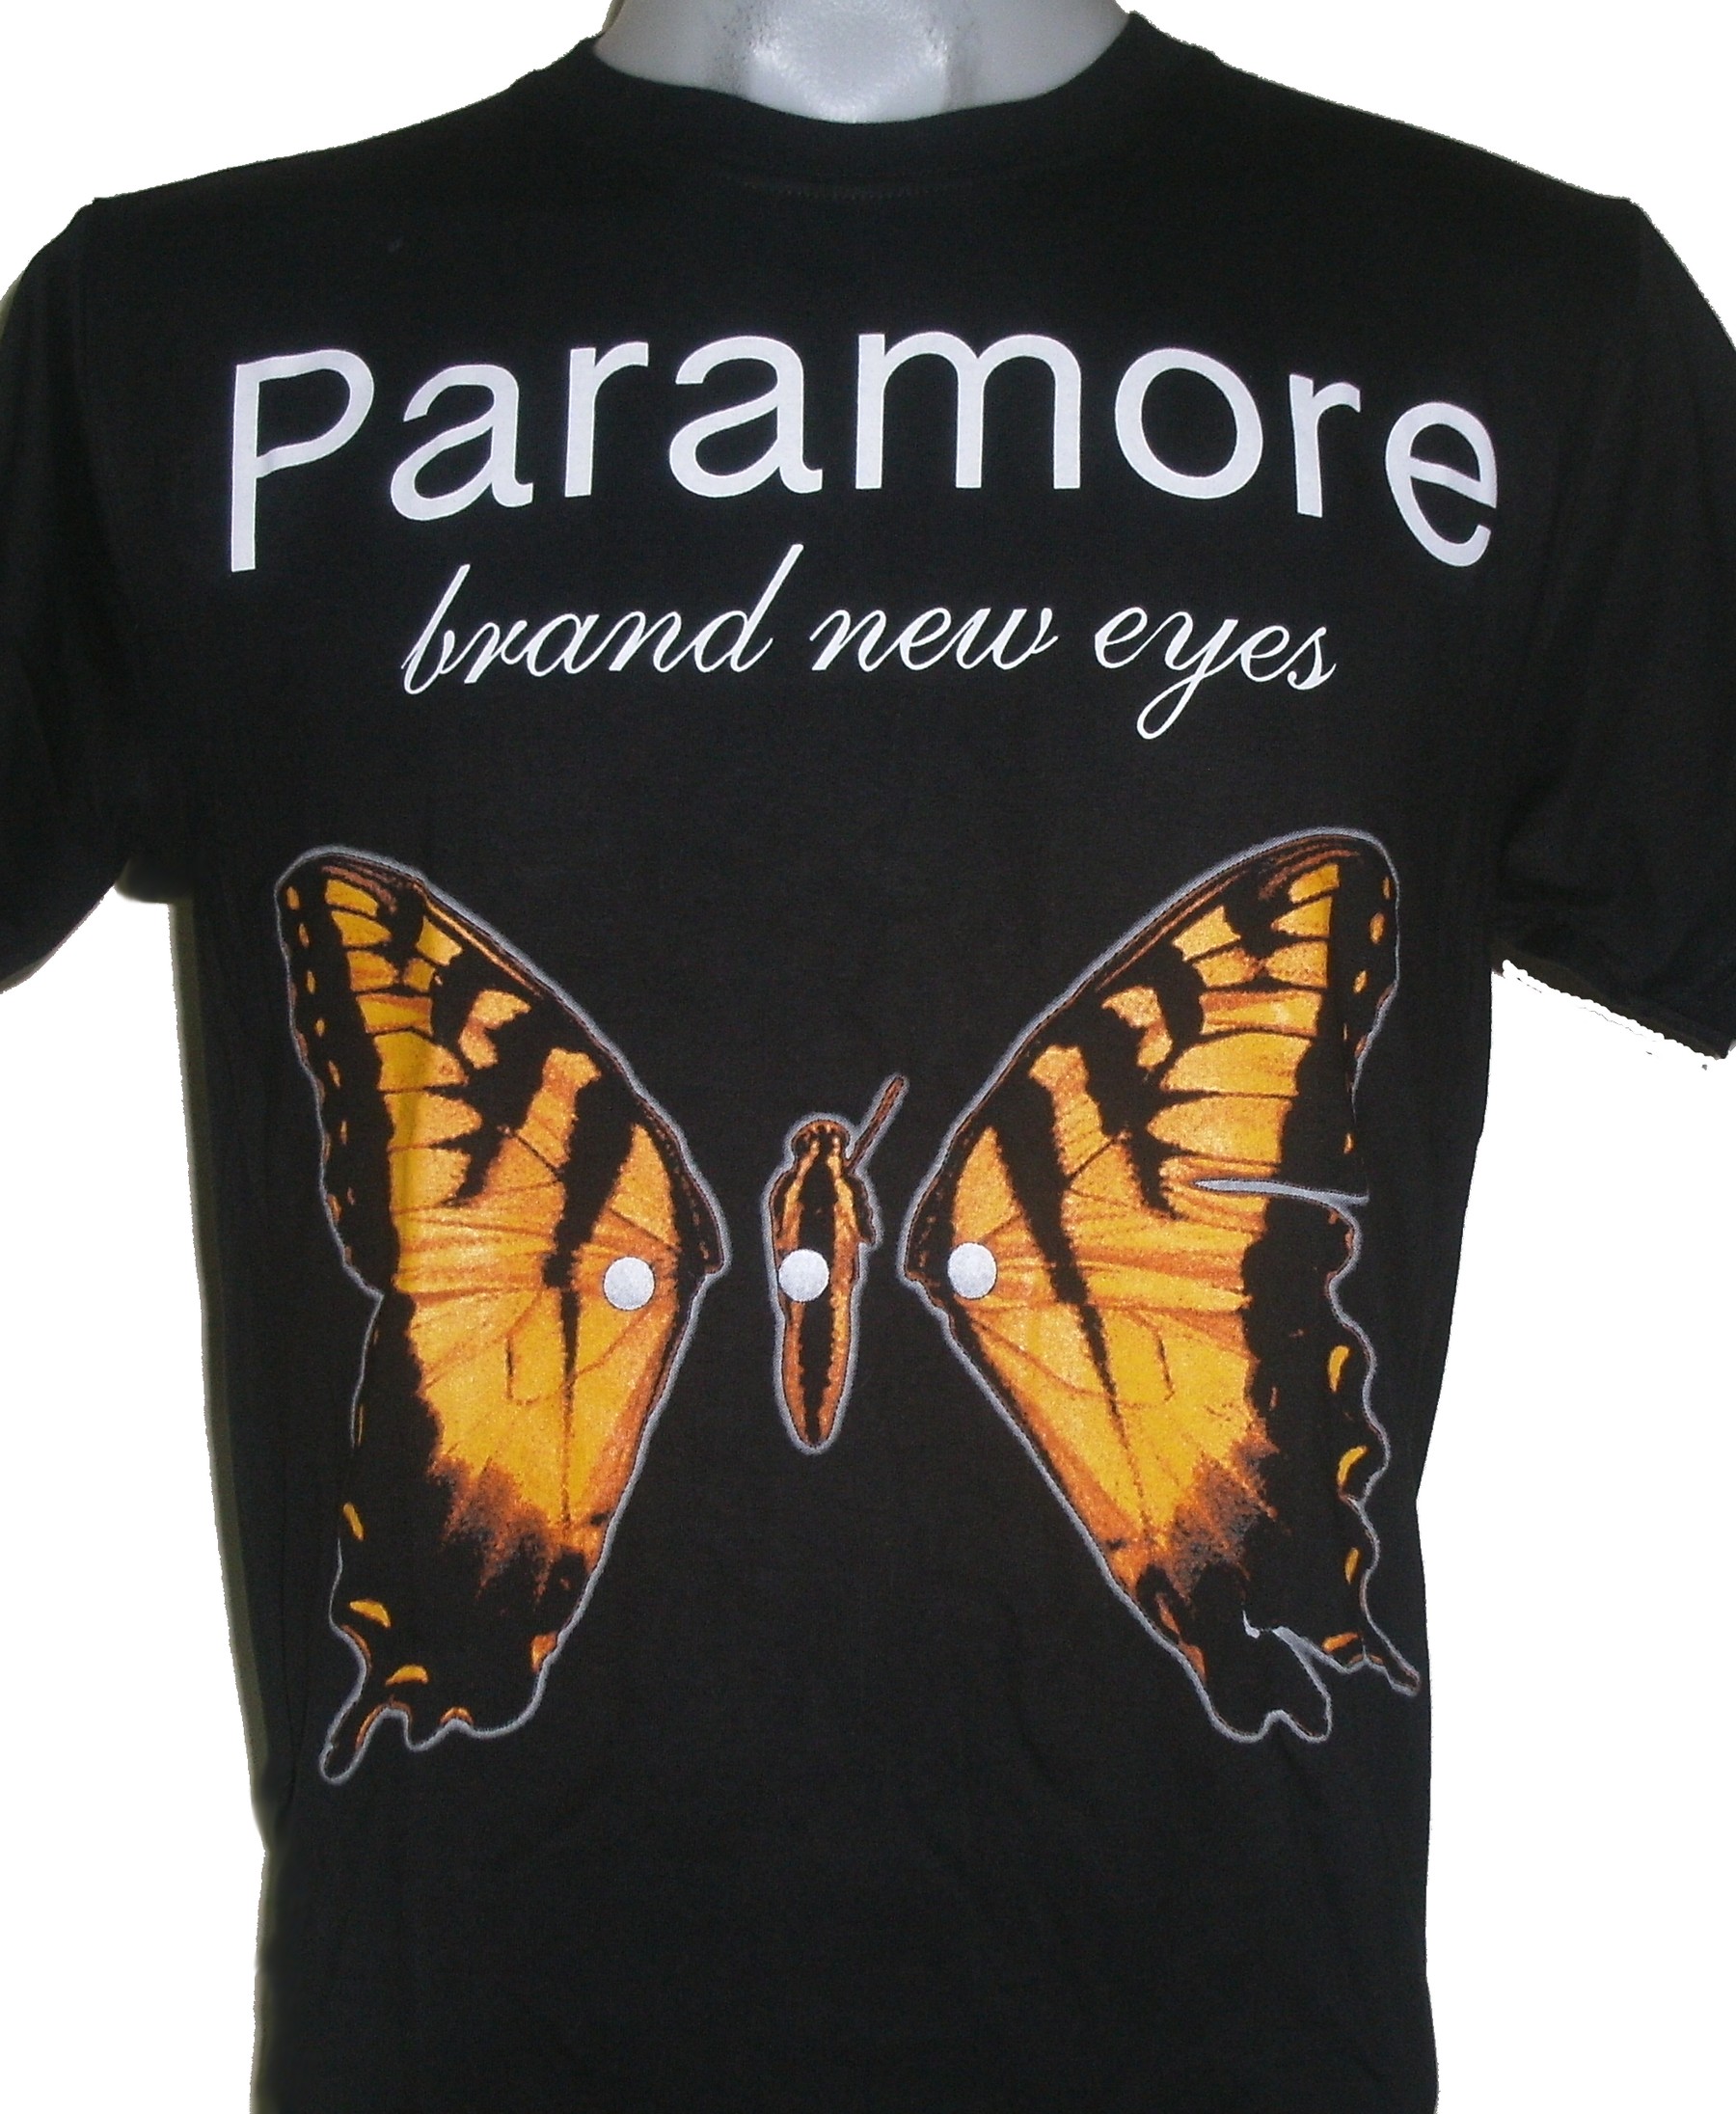 Paramore t-shirt Brand New Eyes size L